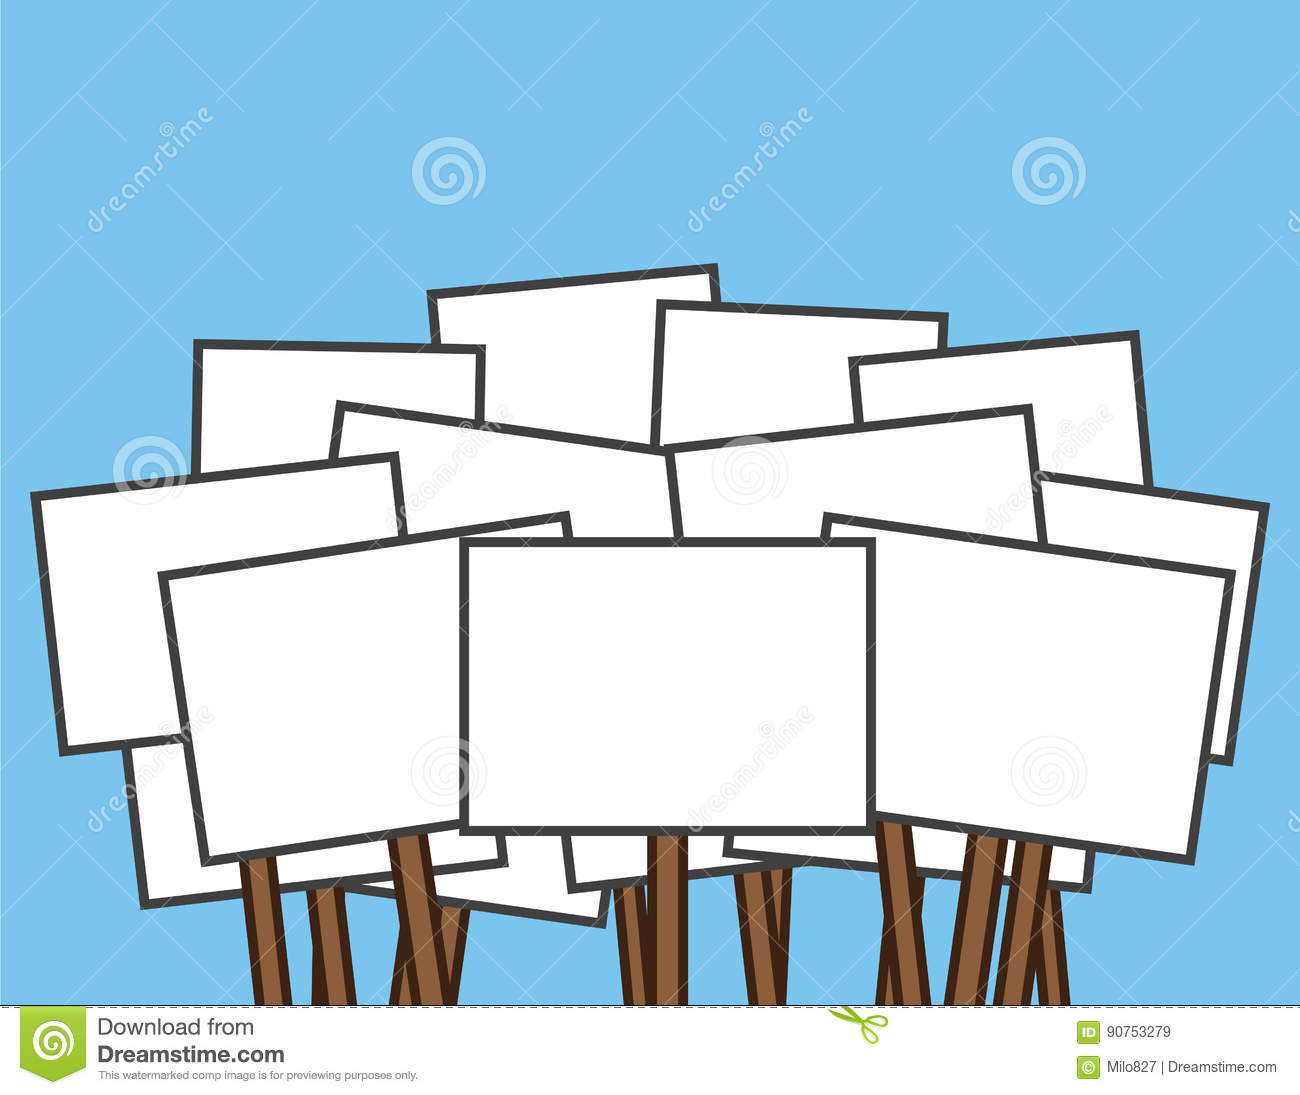 Protest sign clipart 3 » Clipart Station.